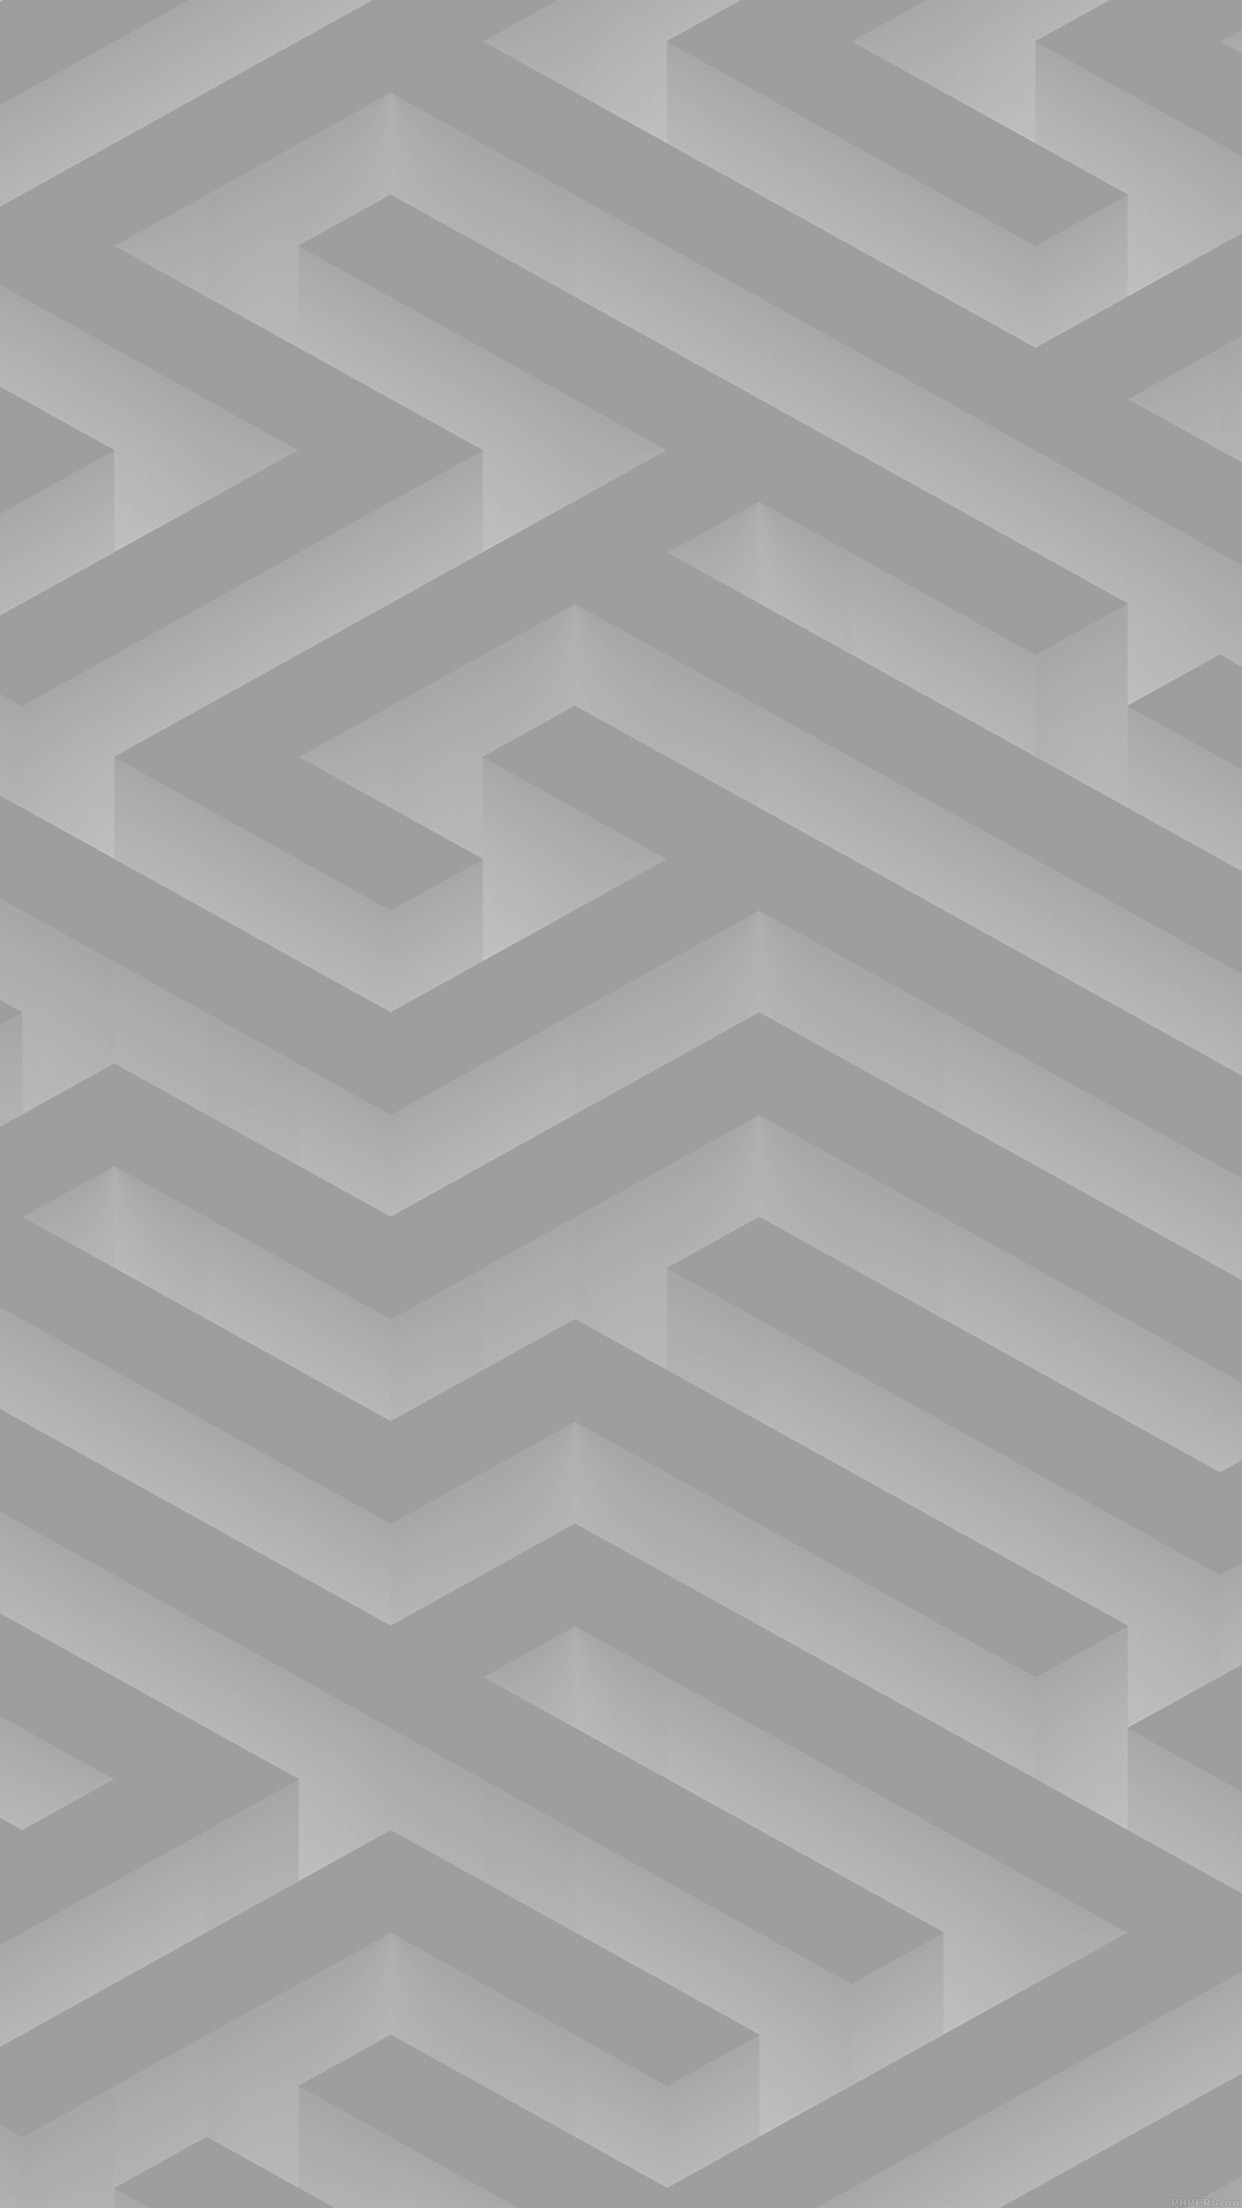 Maze Art White Abstract Patterns Android wallpaper